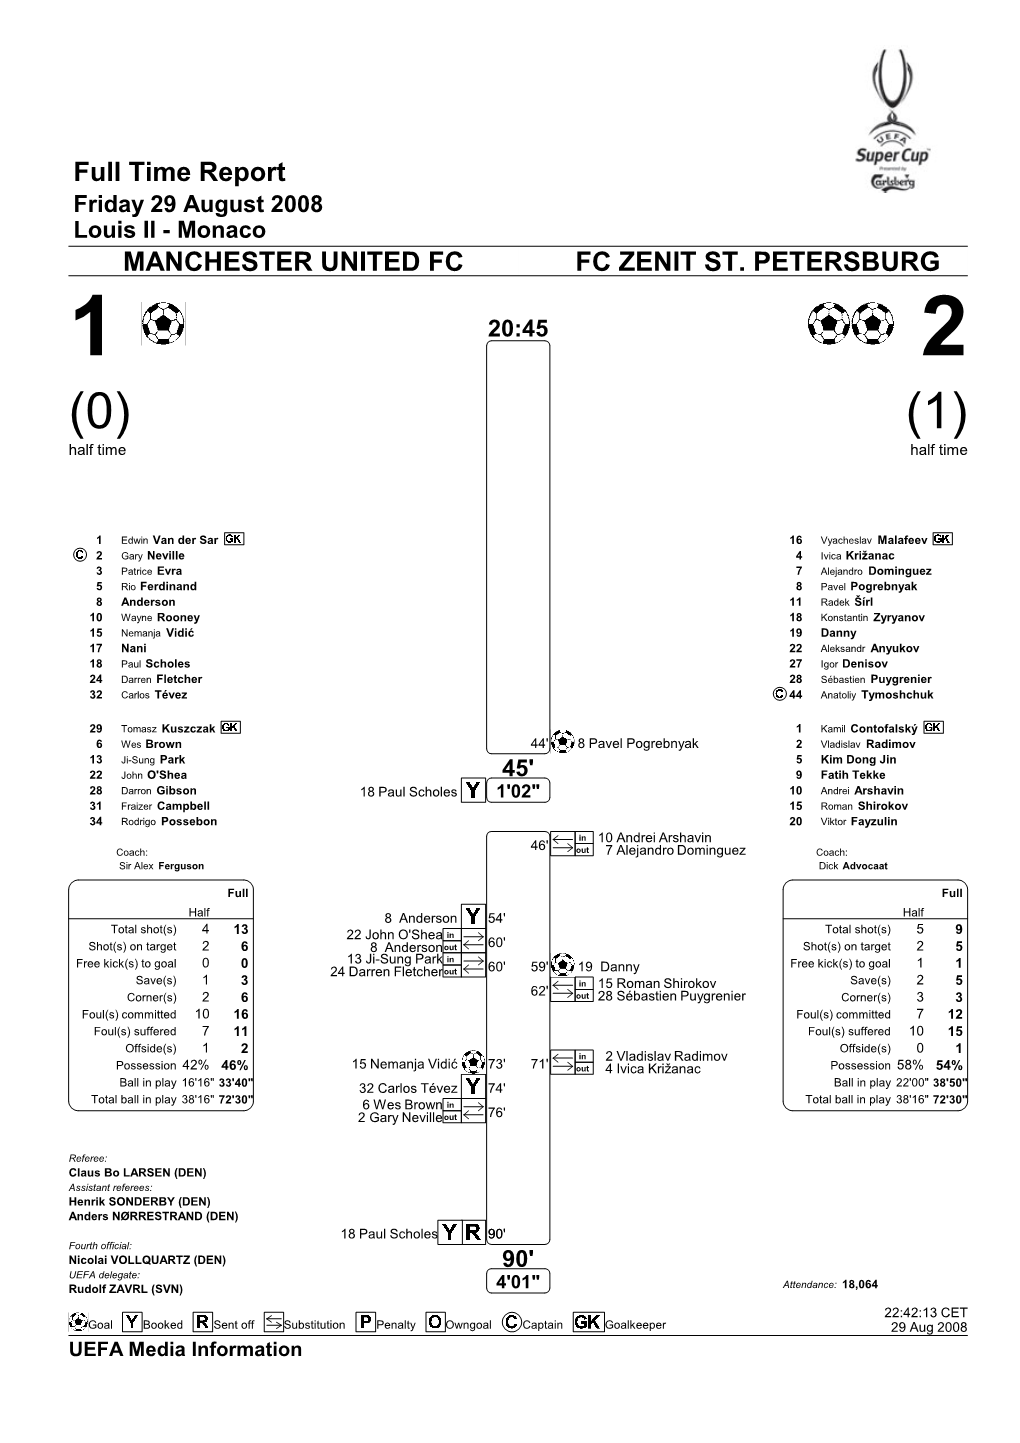 Full Time Report MANCHESTER UNITED FC FC ZENIT ST